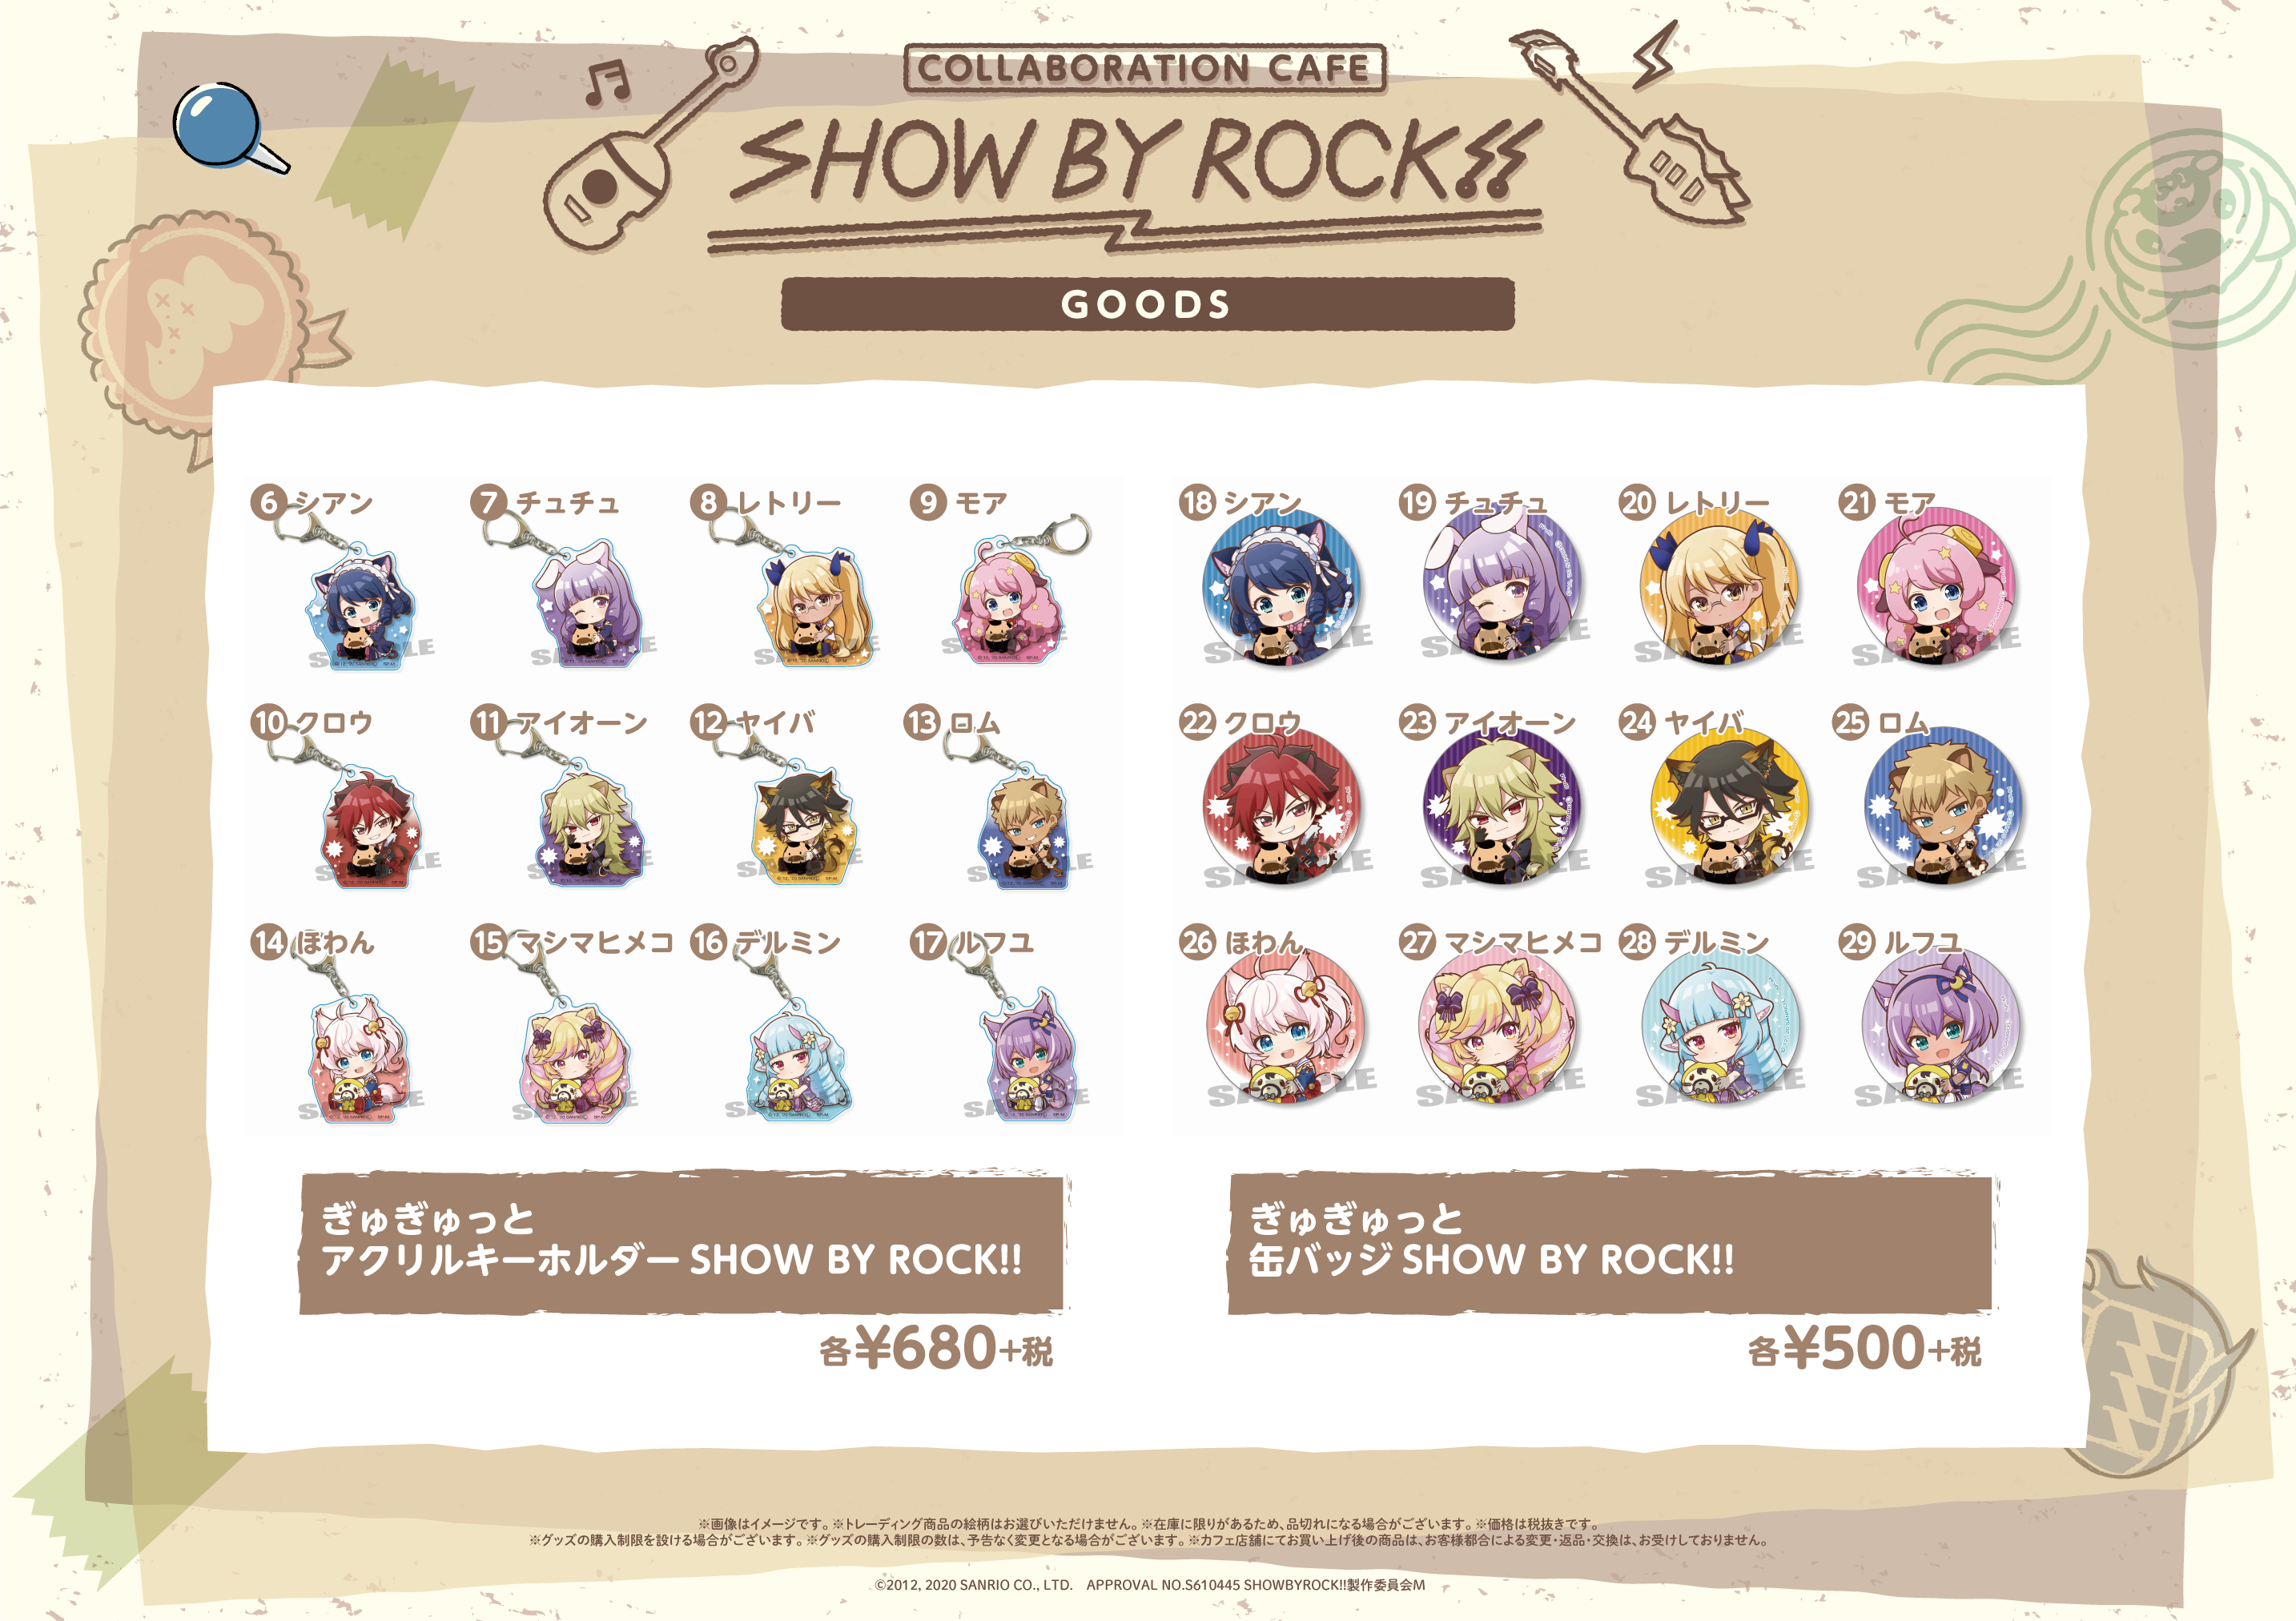 Show by Rock collaboration with The Guest Cafe – 欲望∞